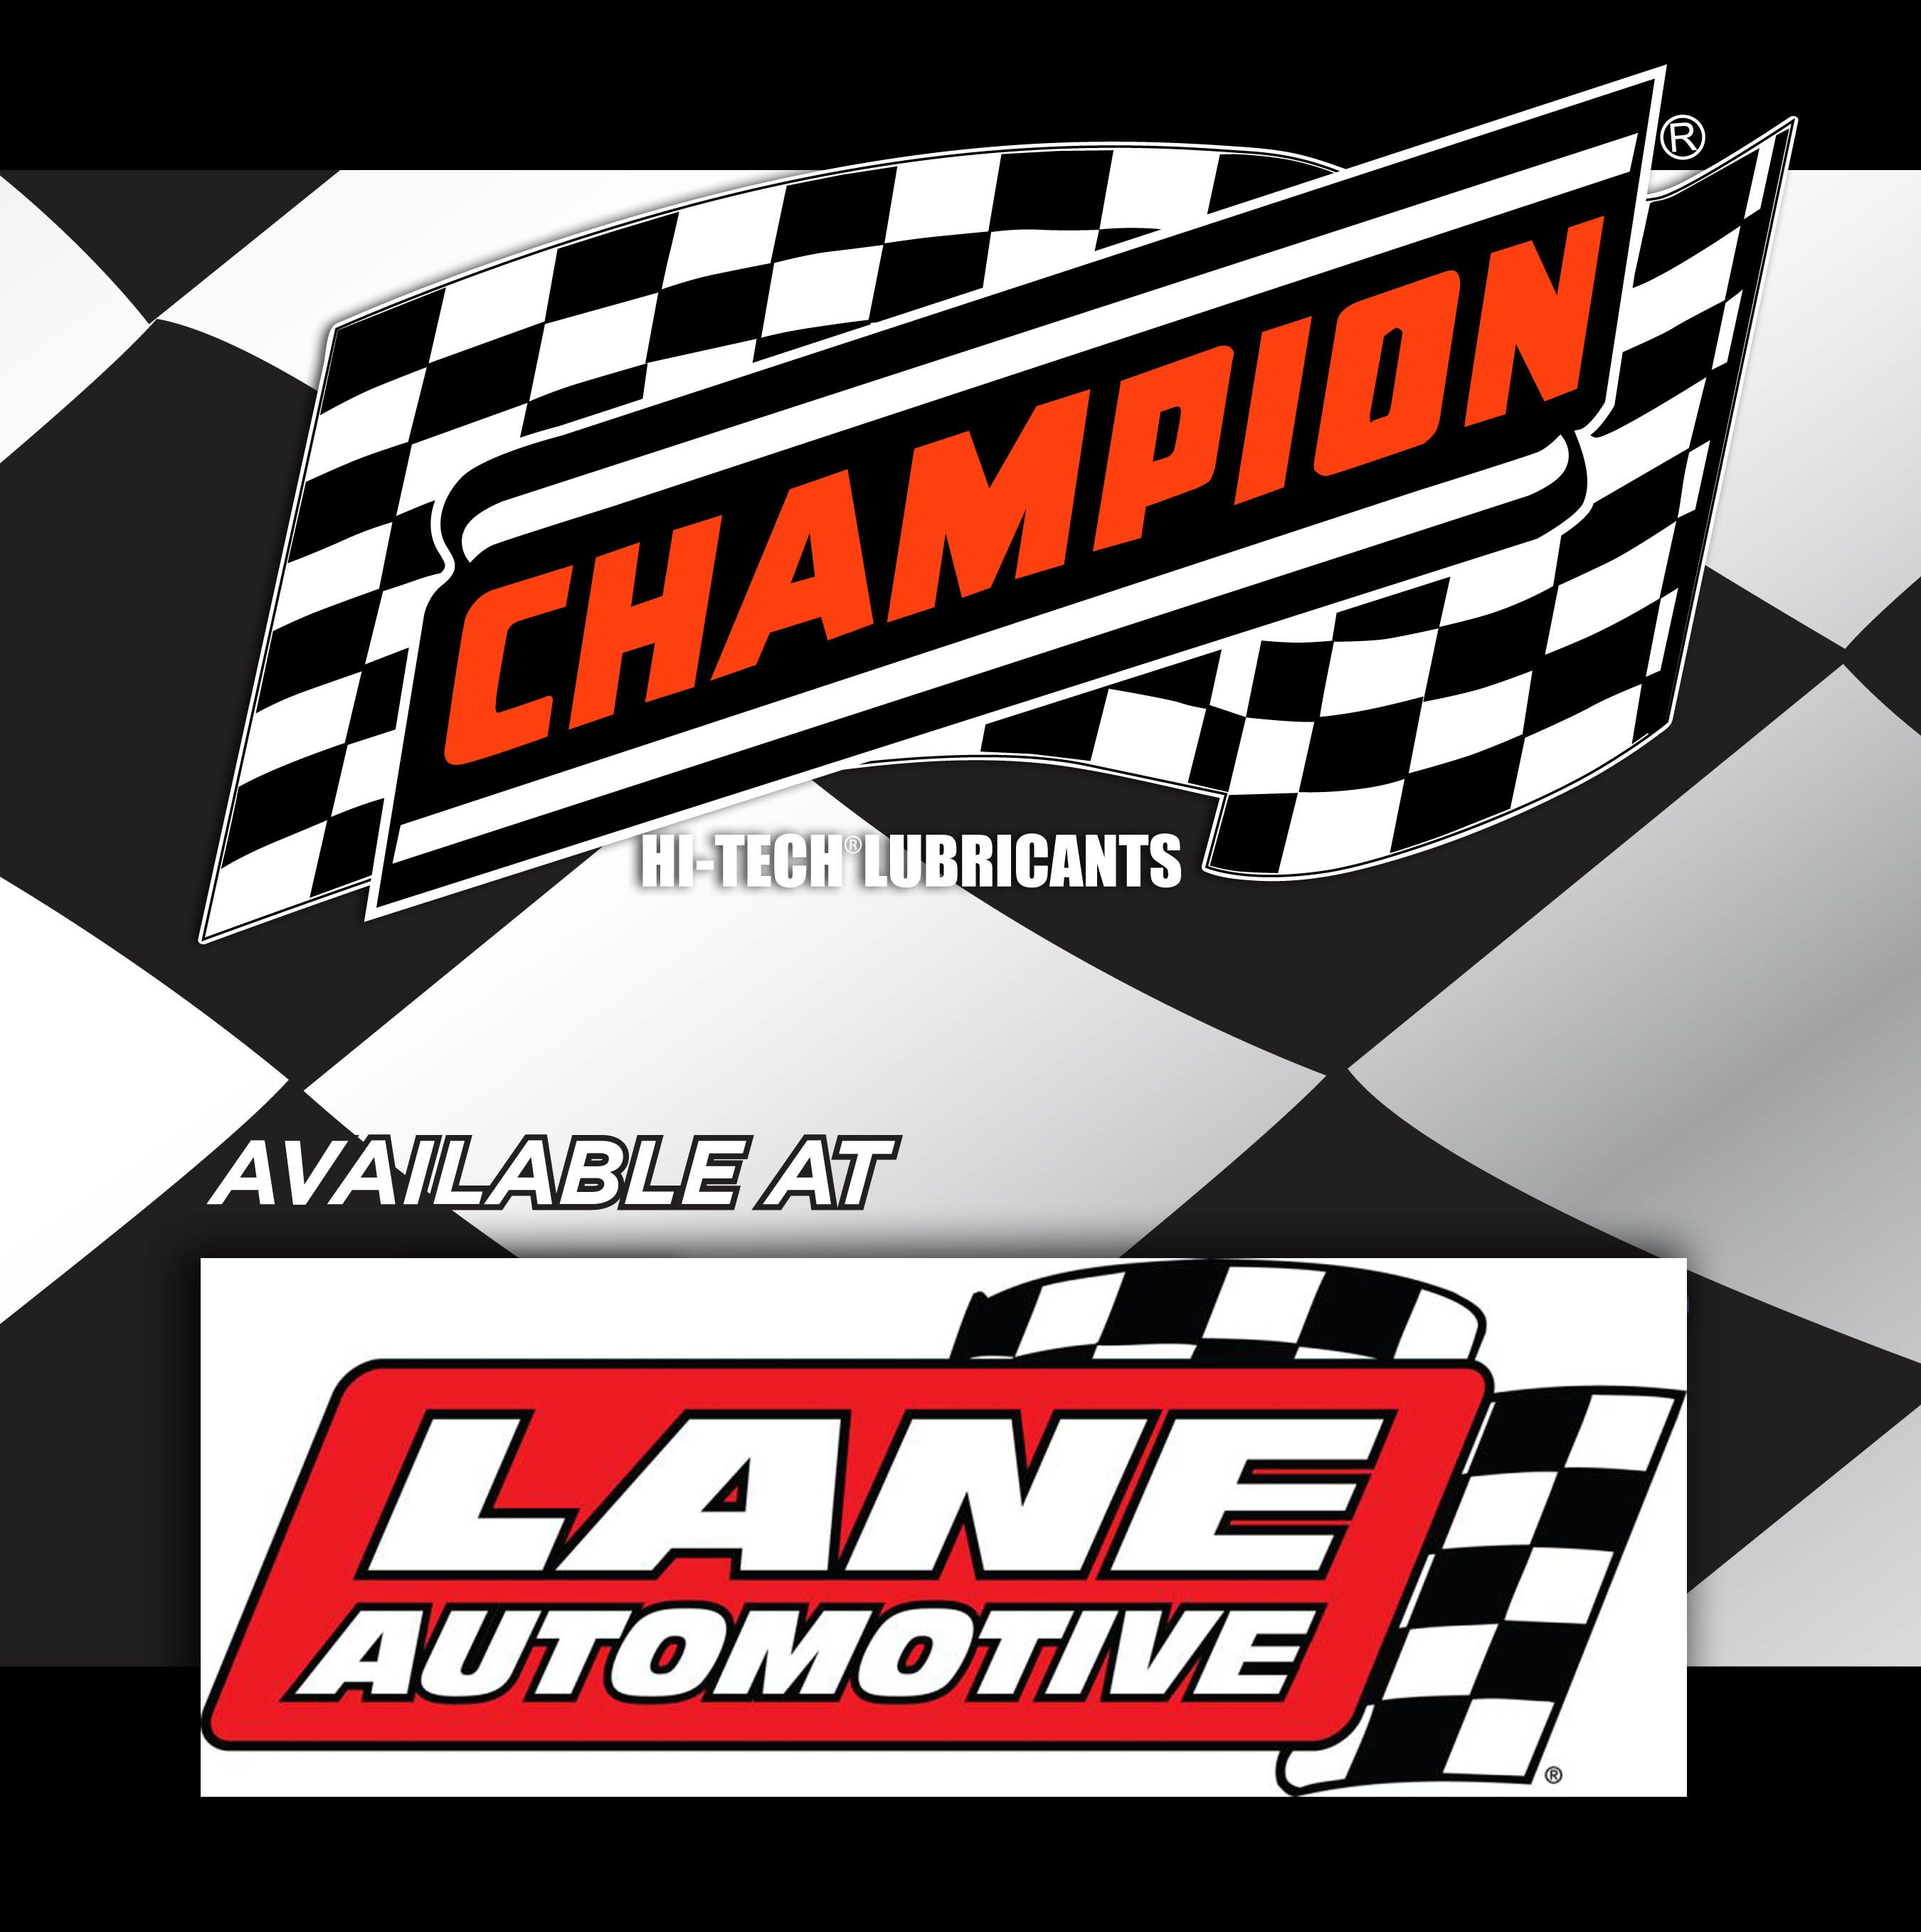 Champion Oil Now Available at Lane Automotive